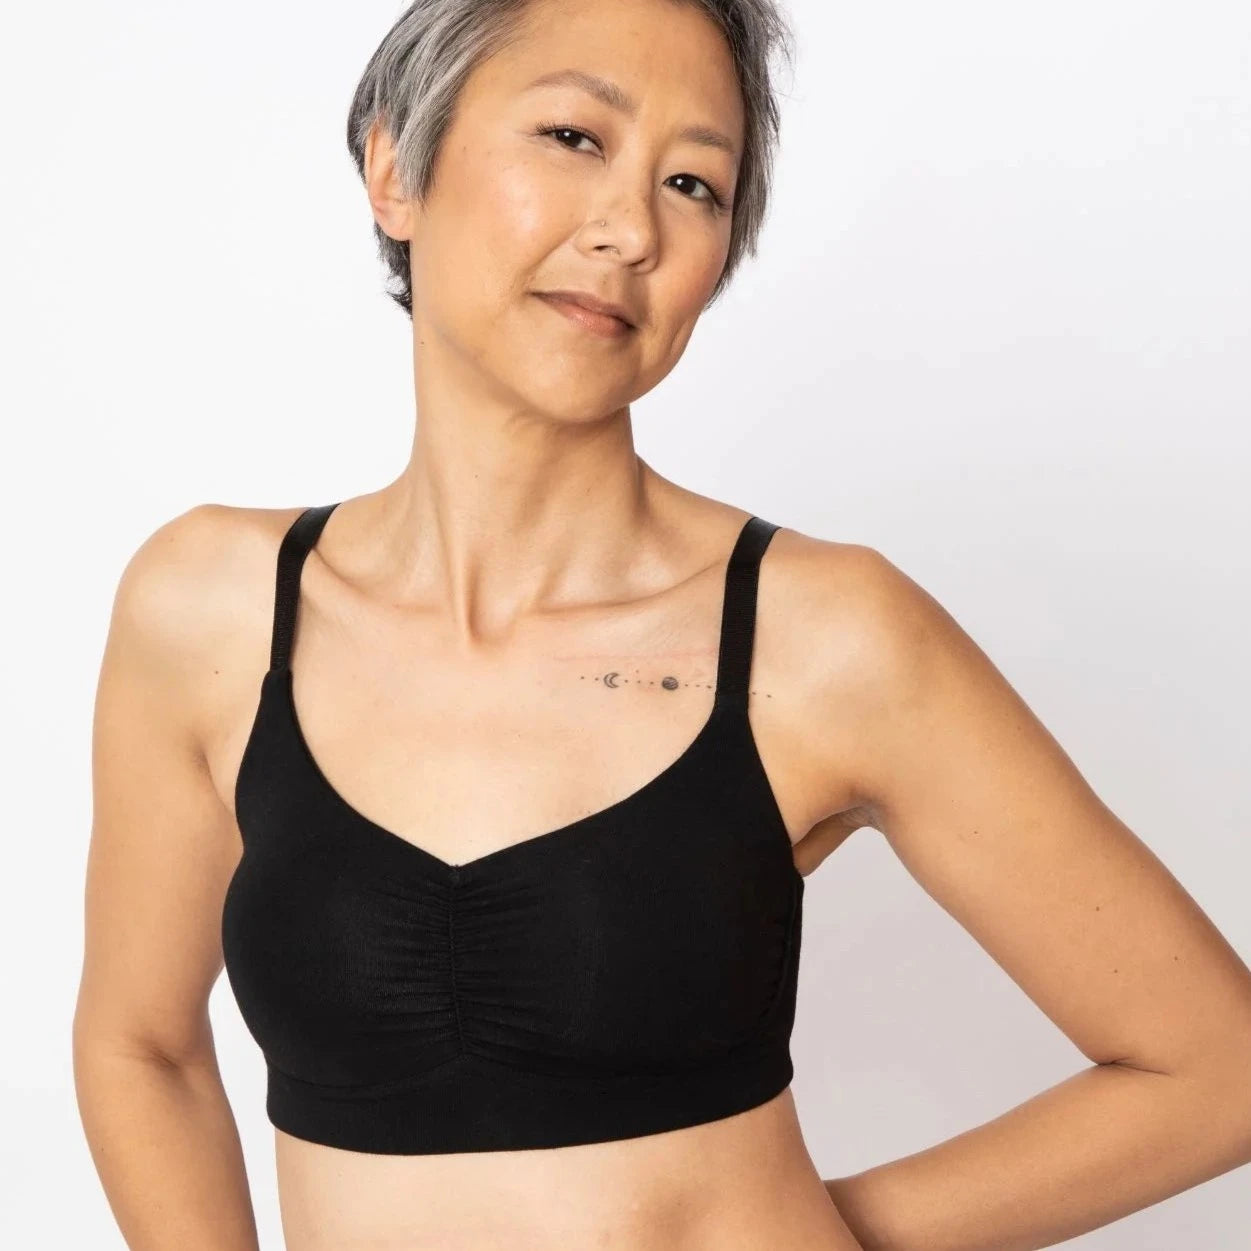 Monica Full Coverage Bra | AnaOno at Bra Sisters | Medium support full coverage bra in Black colour, suitable after a mastectomy.